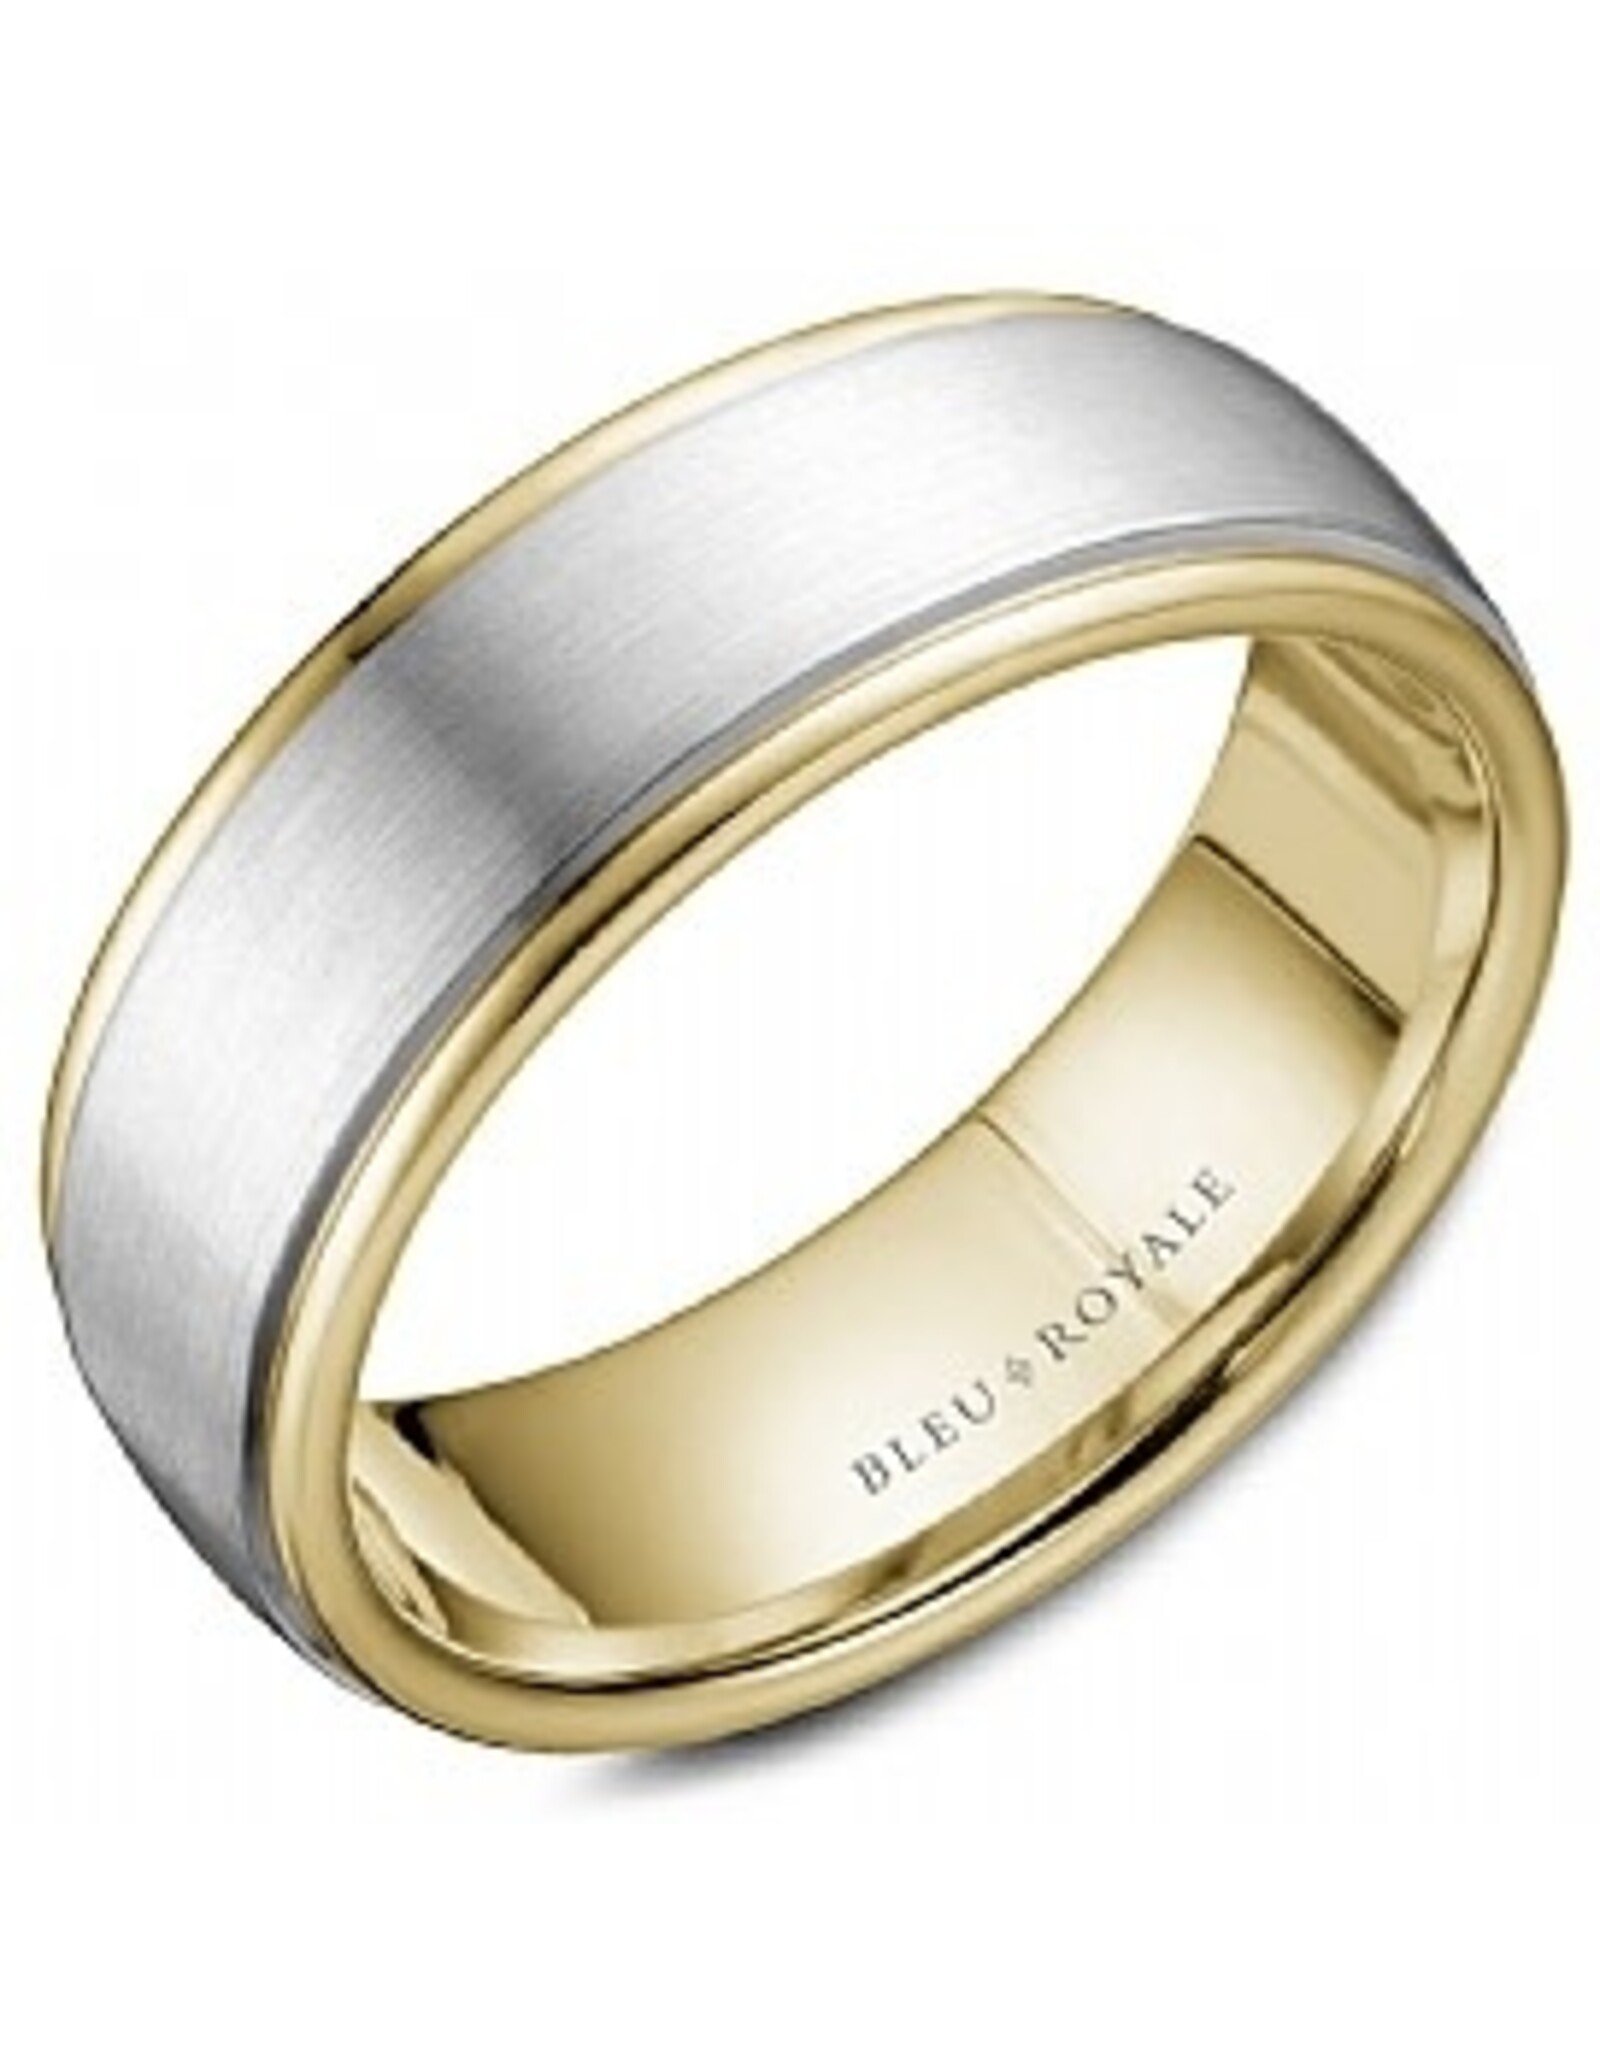 14K White Gold & Yellow Gold Band with Sandpaper Center & High Polish Edges - 7.5mm